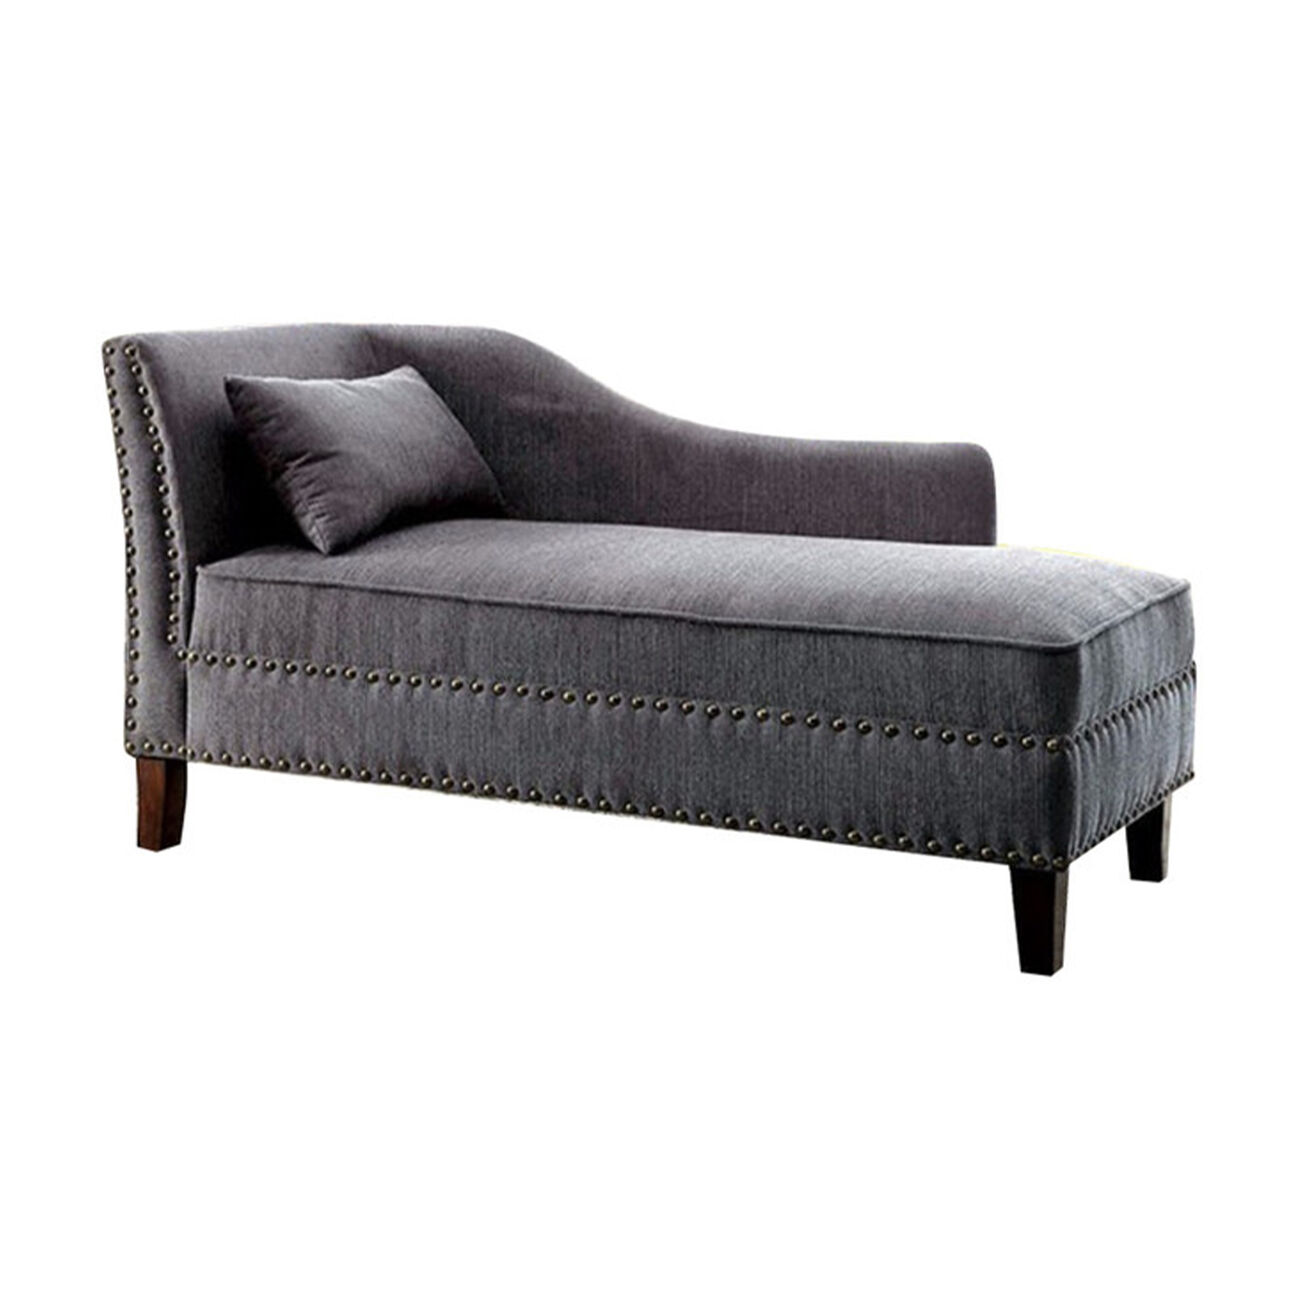  Contemporary Gray Linen-Like Fabric Chaise